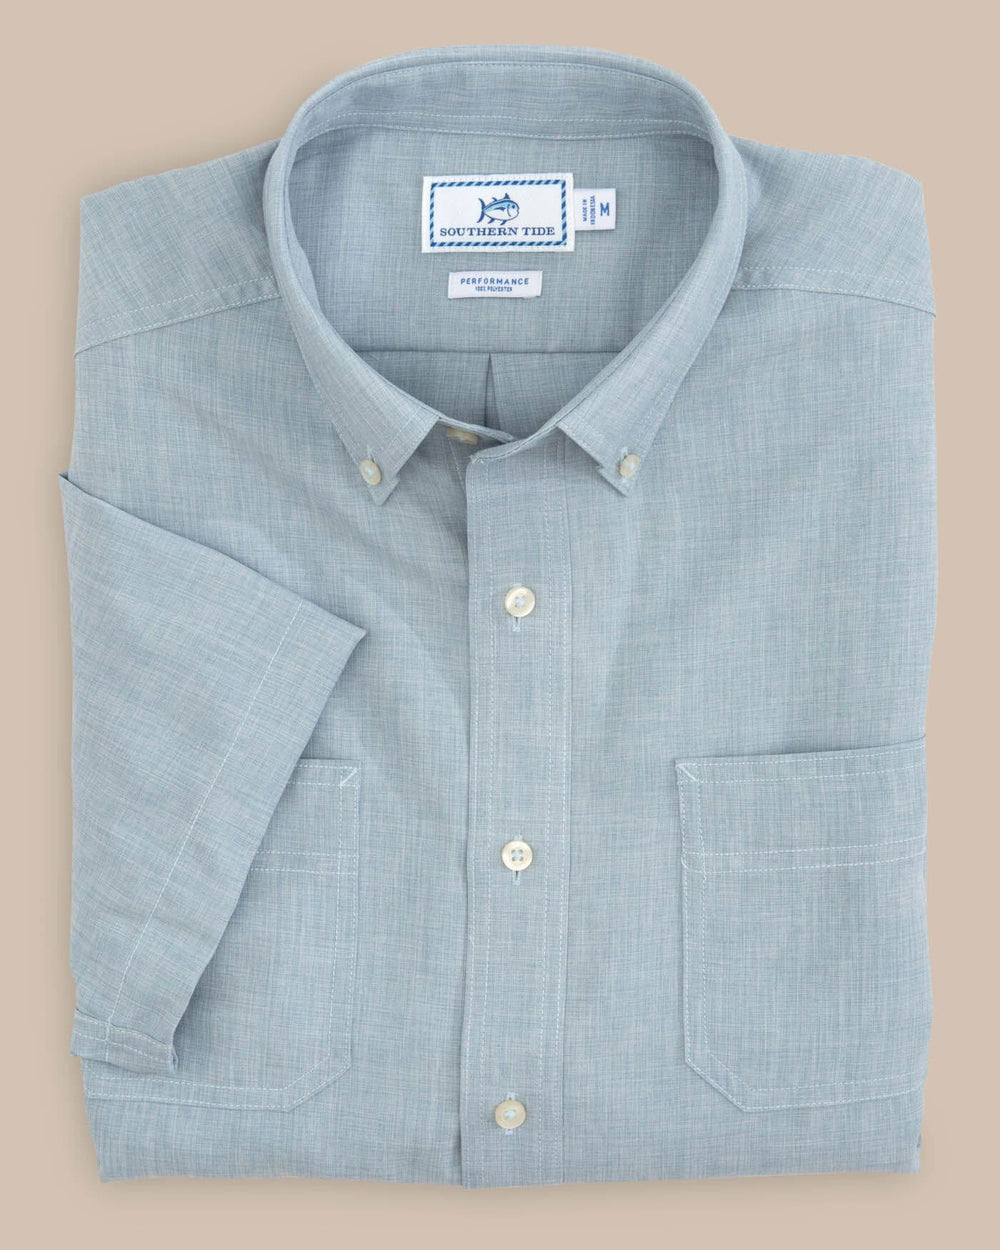 The folded view of the Men's Grey Short Sleeve Dock Shirt by Southern Tide - Seagull Grey